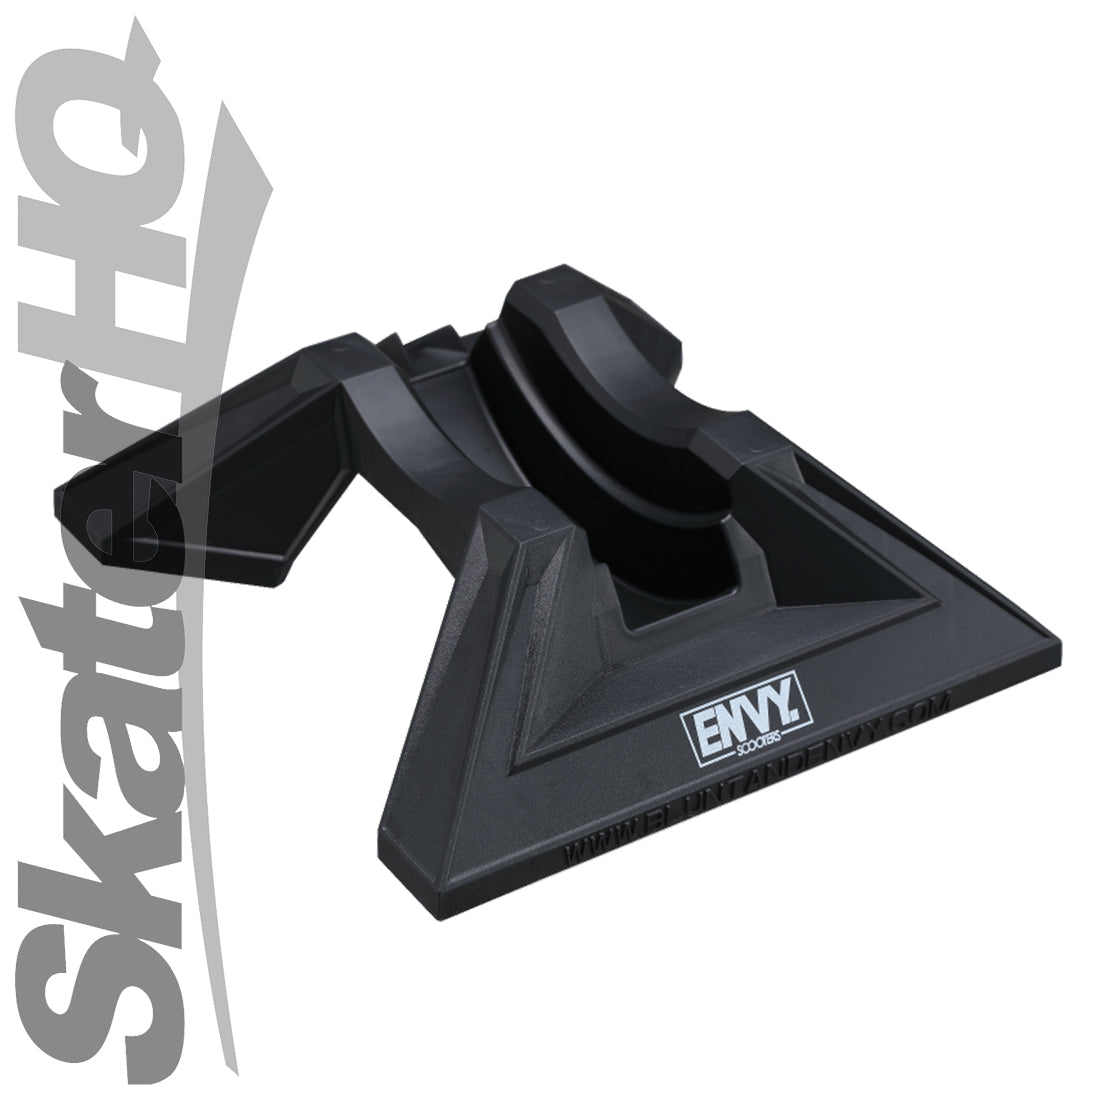 Envy V2 Scooter Stand - Black Scooter Accessories